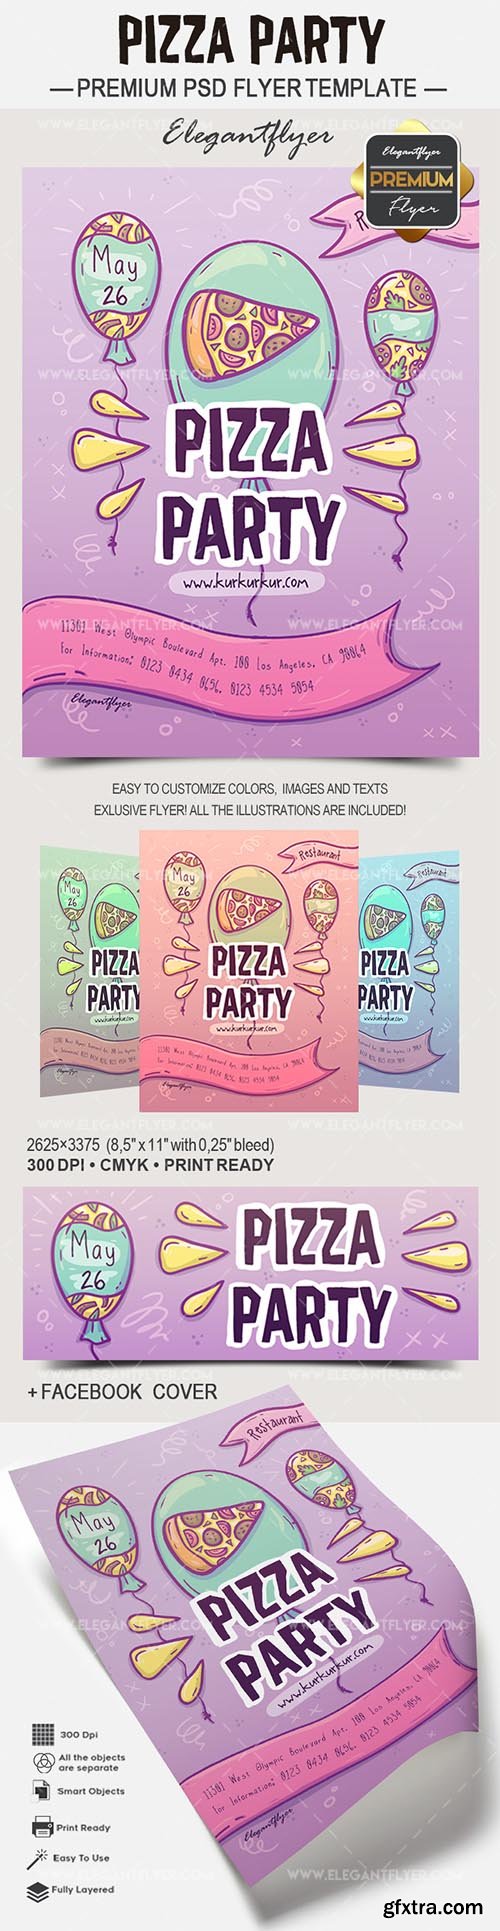 Pizza Party – Flyer PSD Template + Facebook Cover